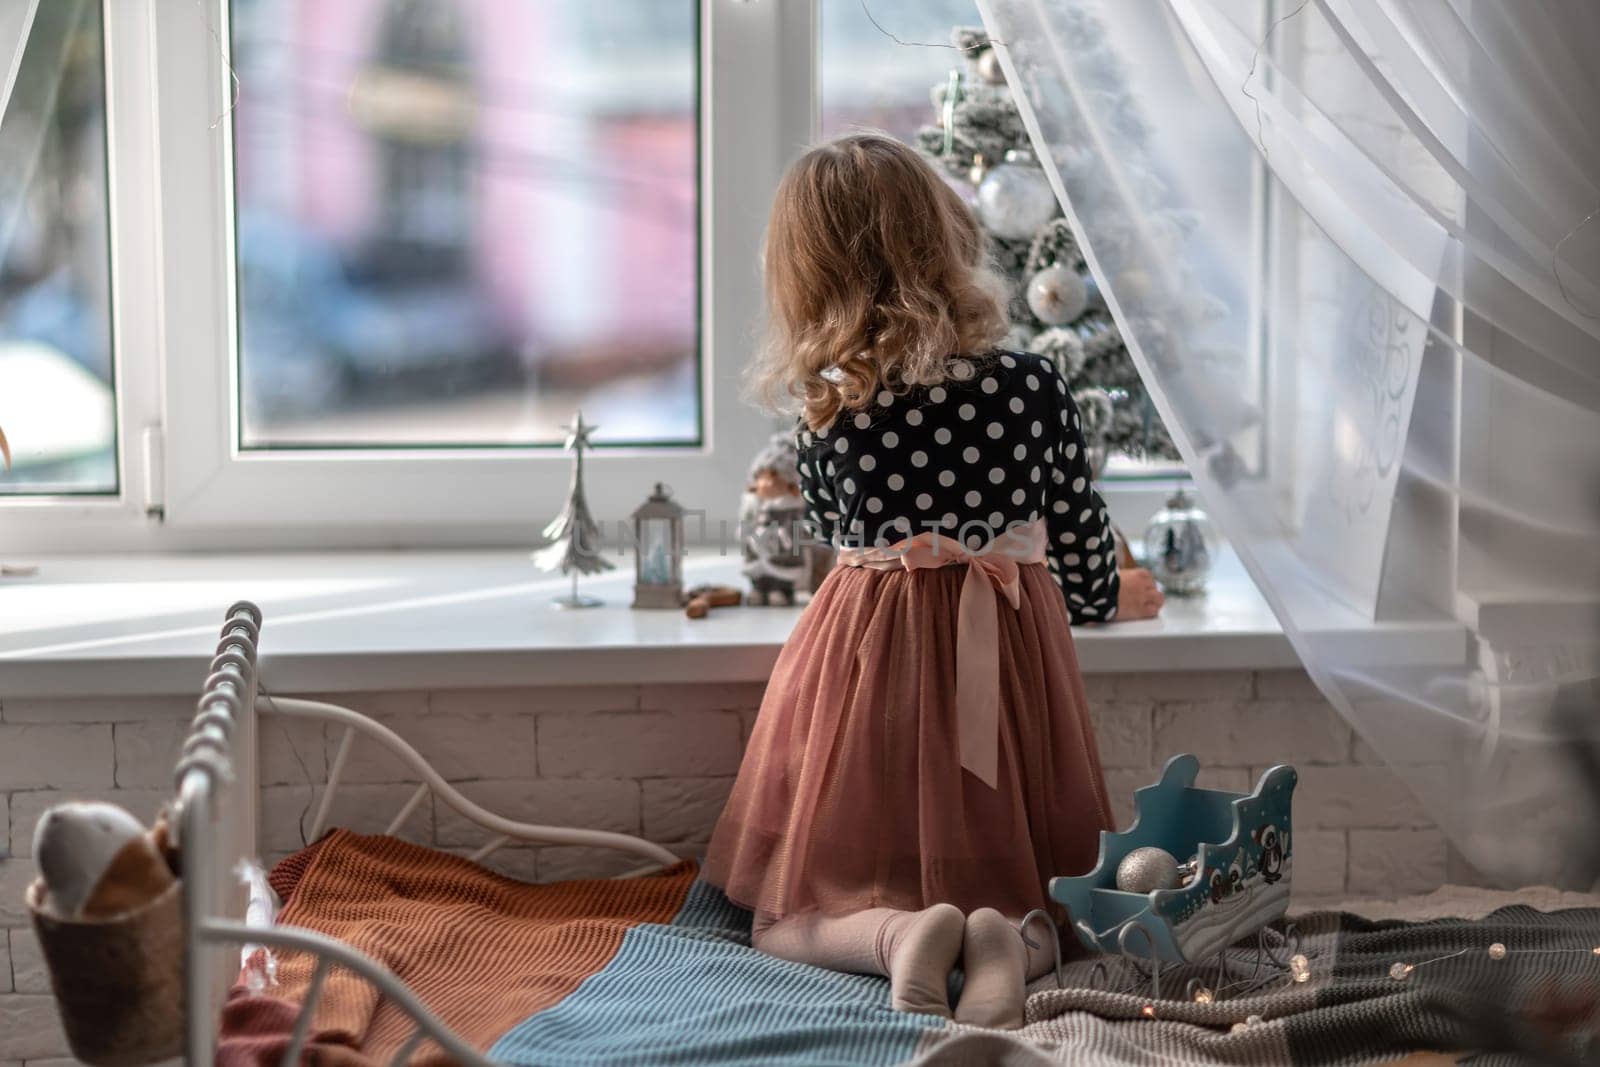 A little girl is sitting on the bed by the window and decorating a small tree with tiny Christmas toys. Happy healthy child celebrating a traditional family holiday. Adorable baby